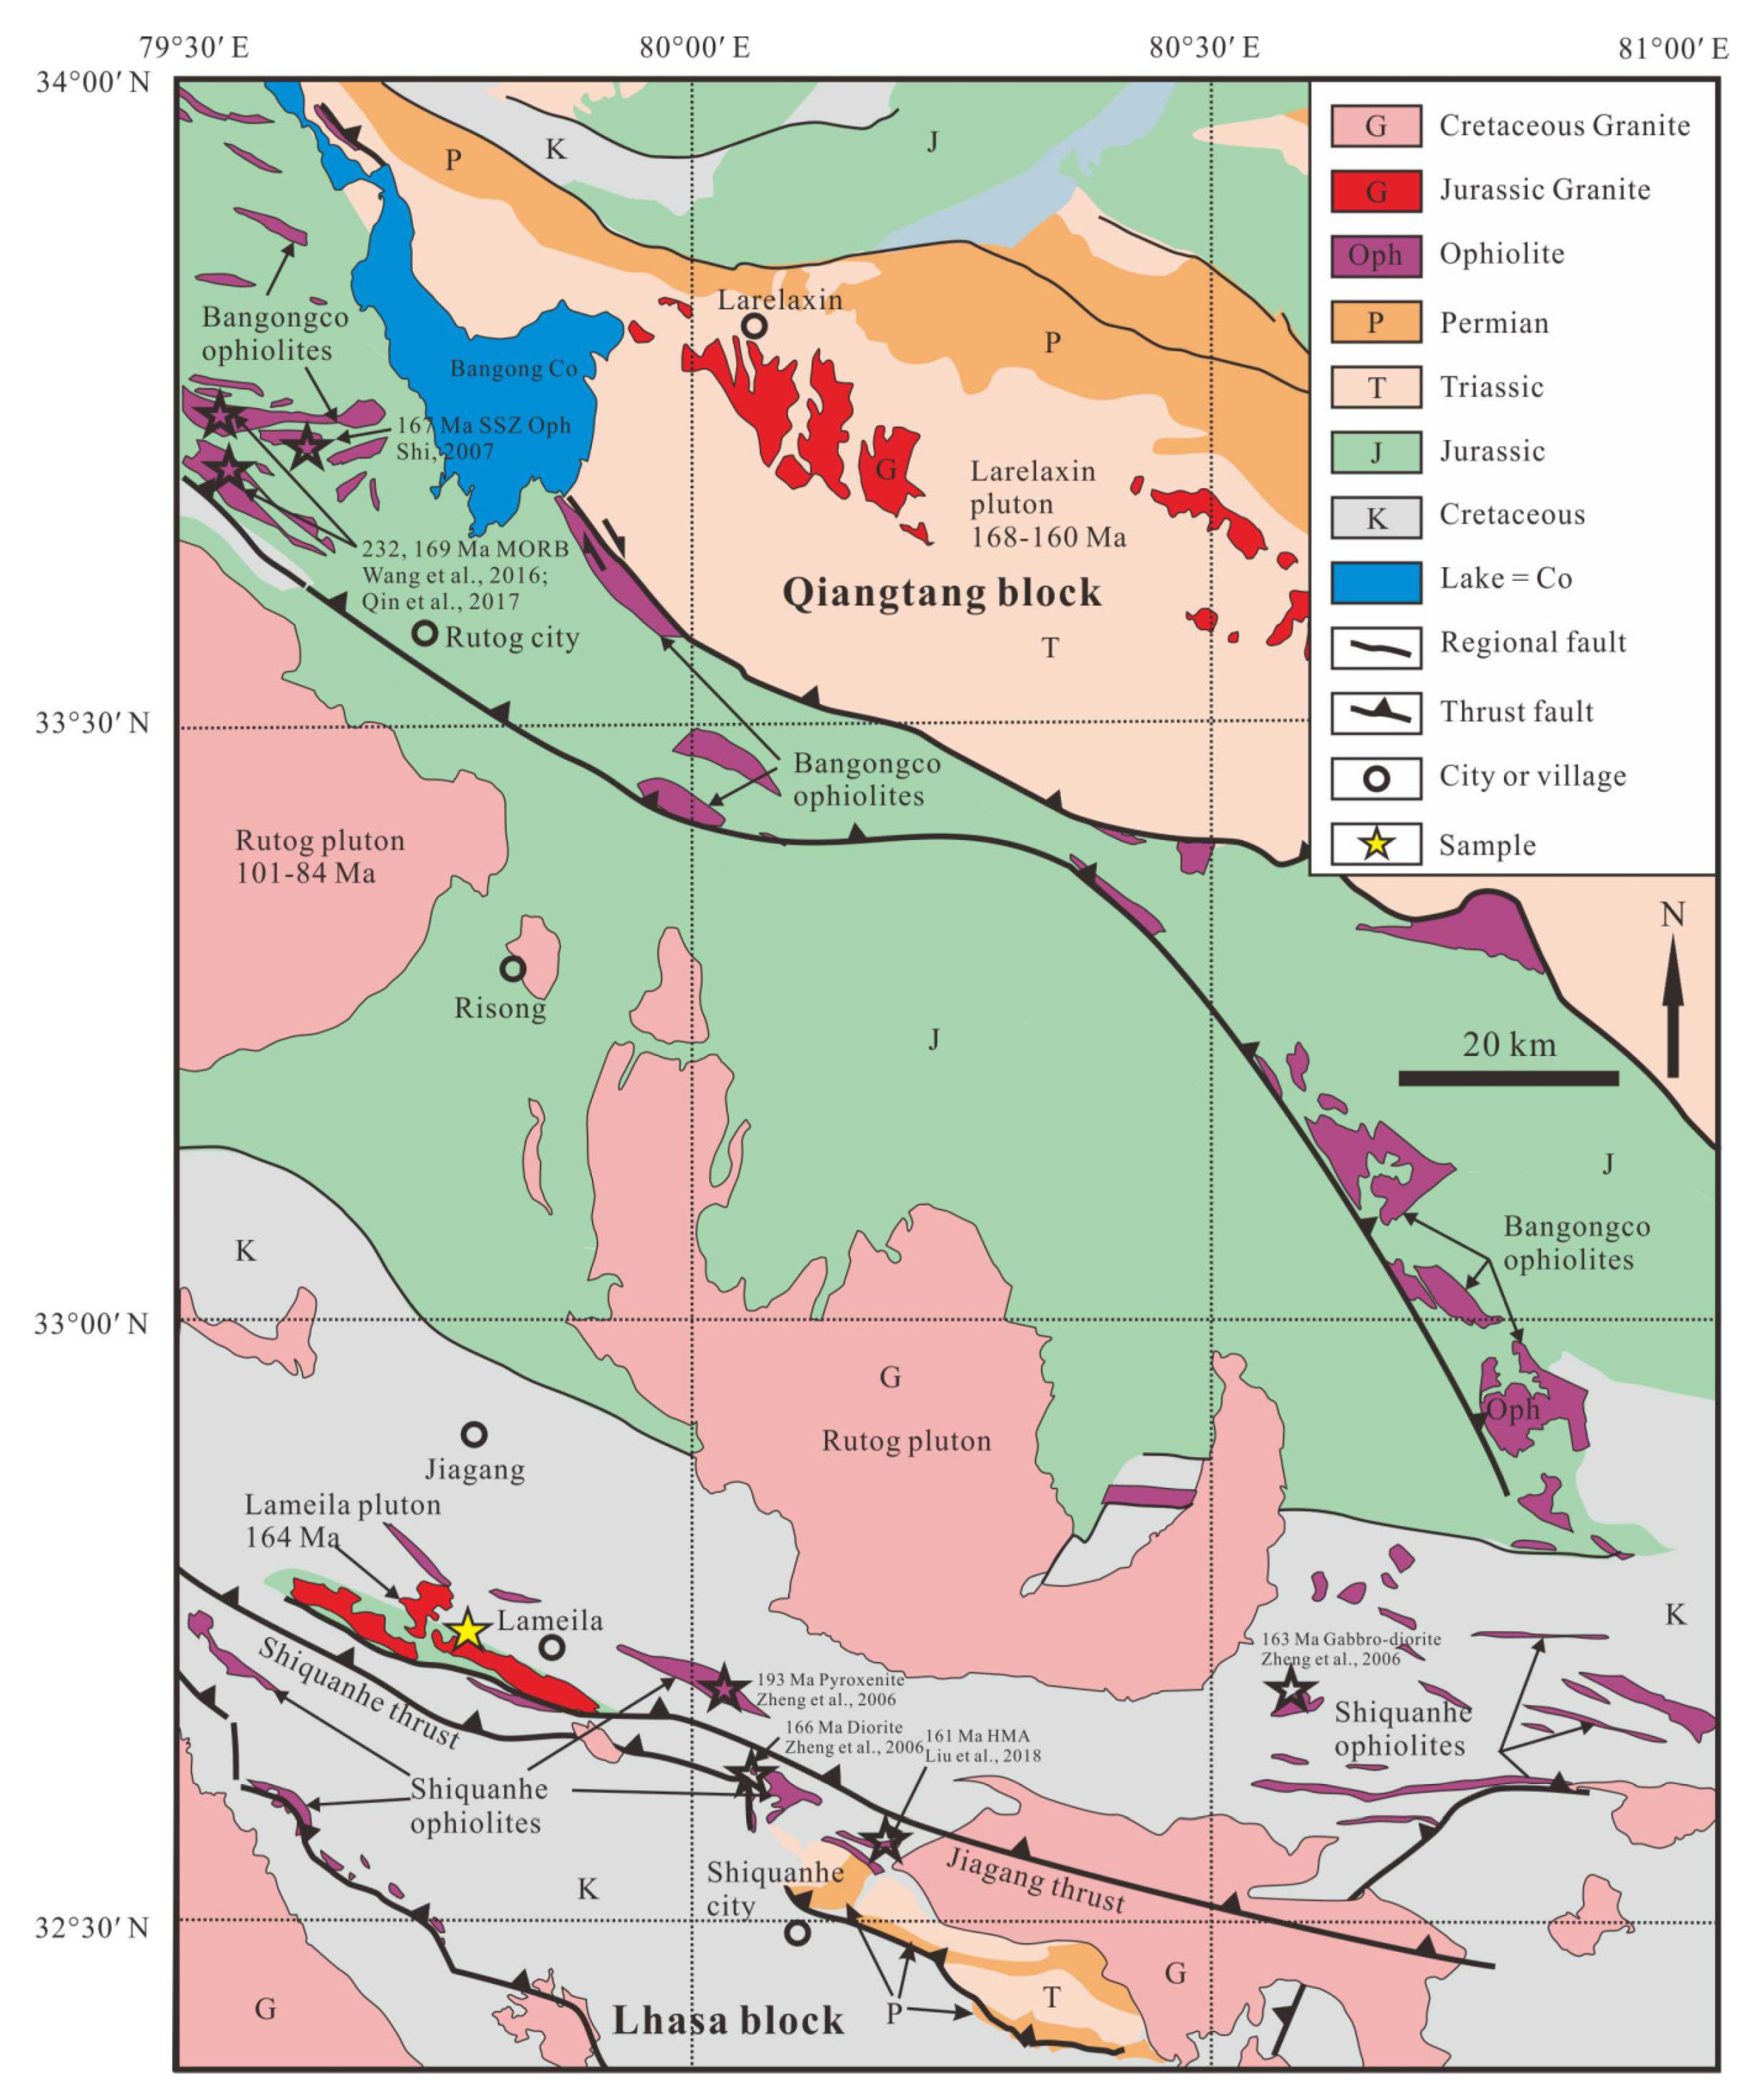 Minerals Free Full Text Dating Oceanic Subduction In The Jurassic Bangong Nujiang Oceanic Arc A Zircon U Pb Age And Lu Hf Isotopes And Al In Hornblende Barometry Study Of The Lameila Pluton In Western Tibet